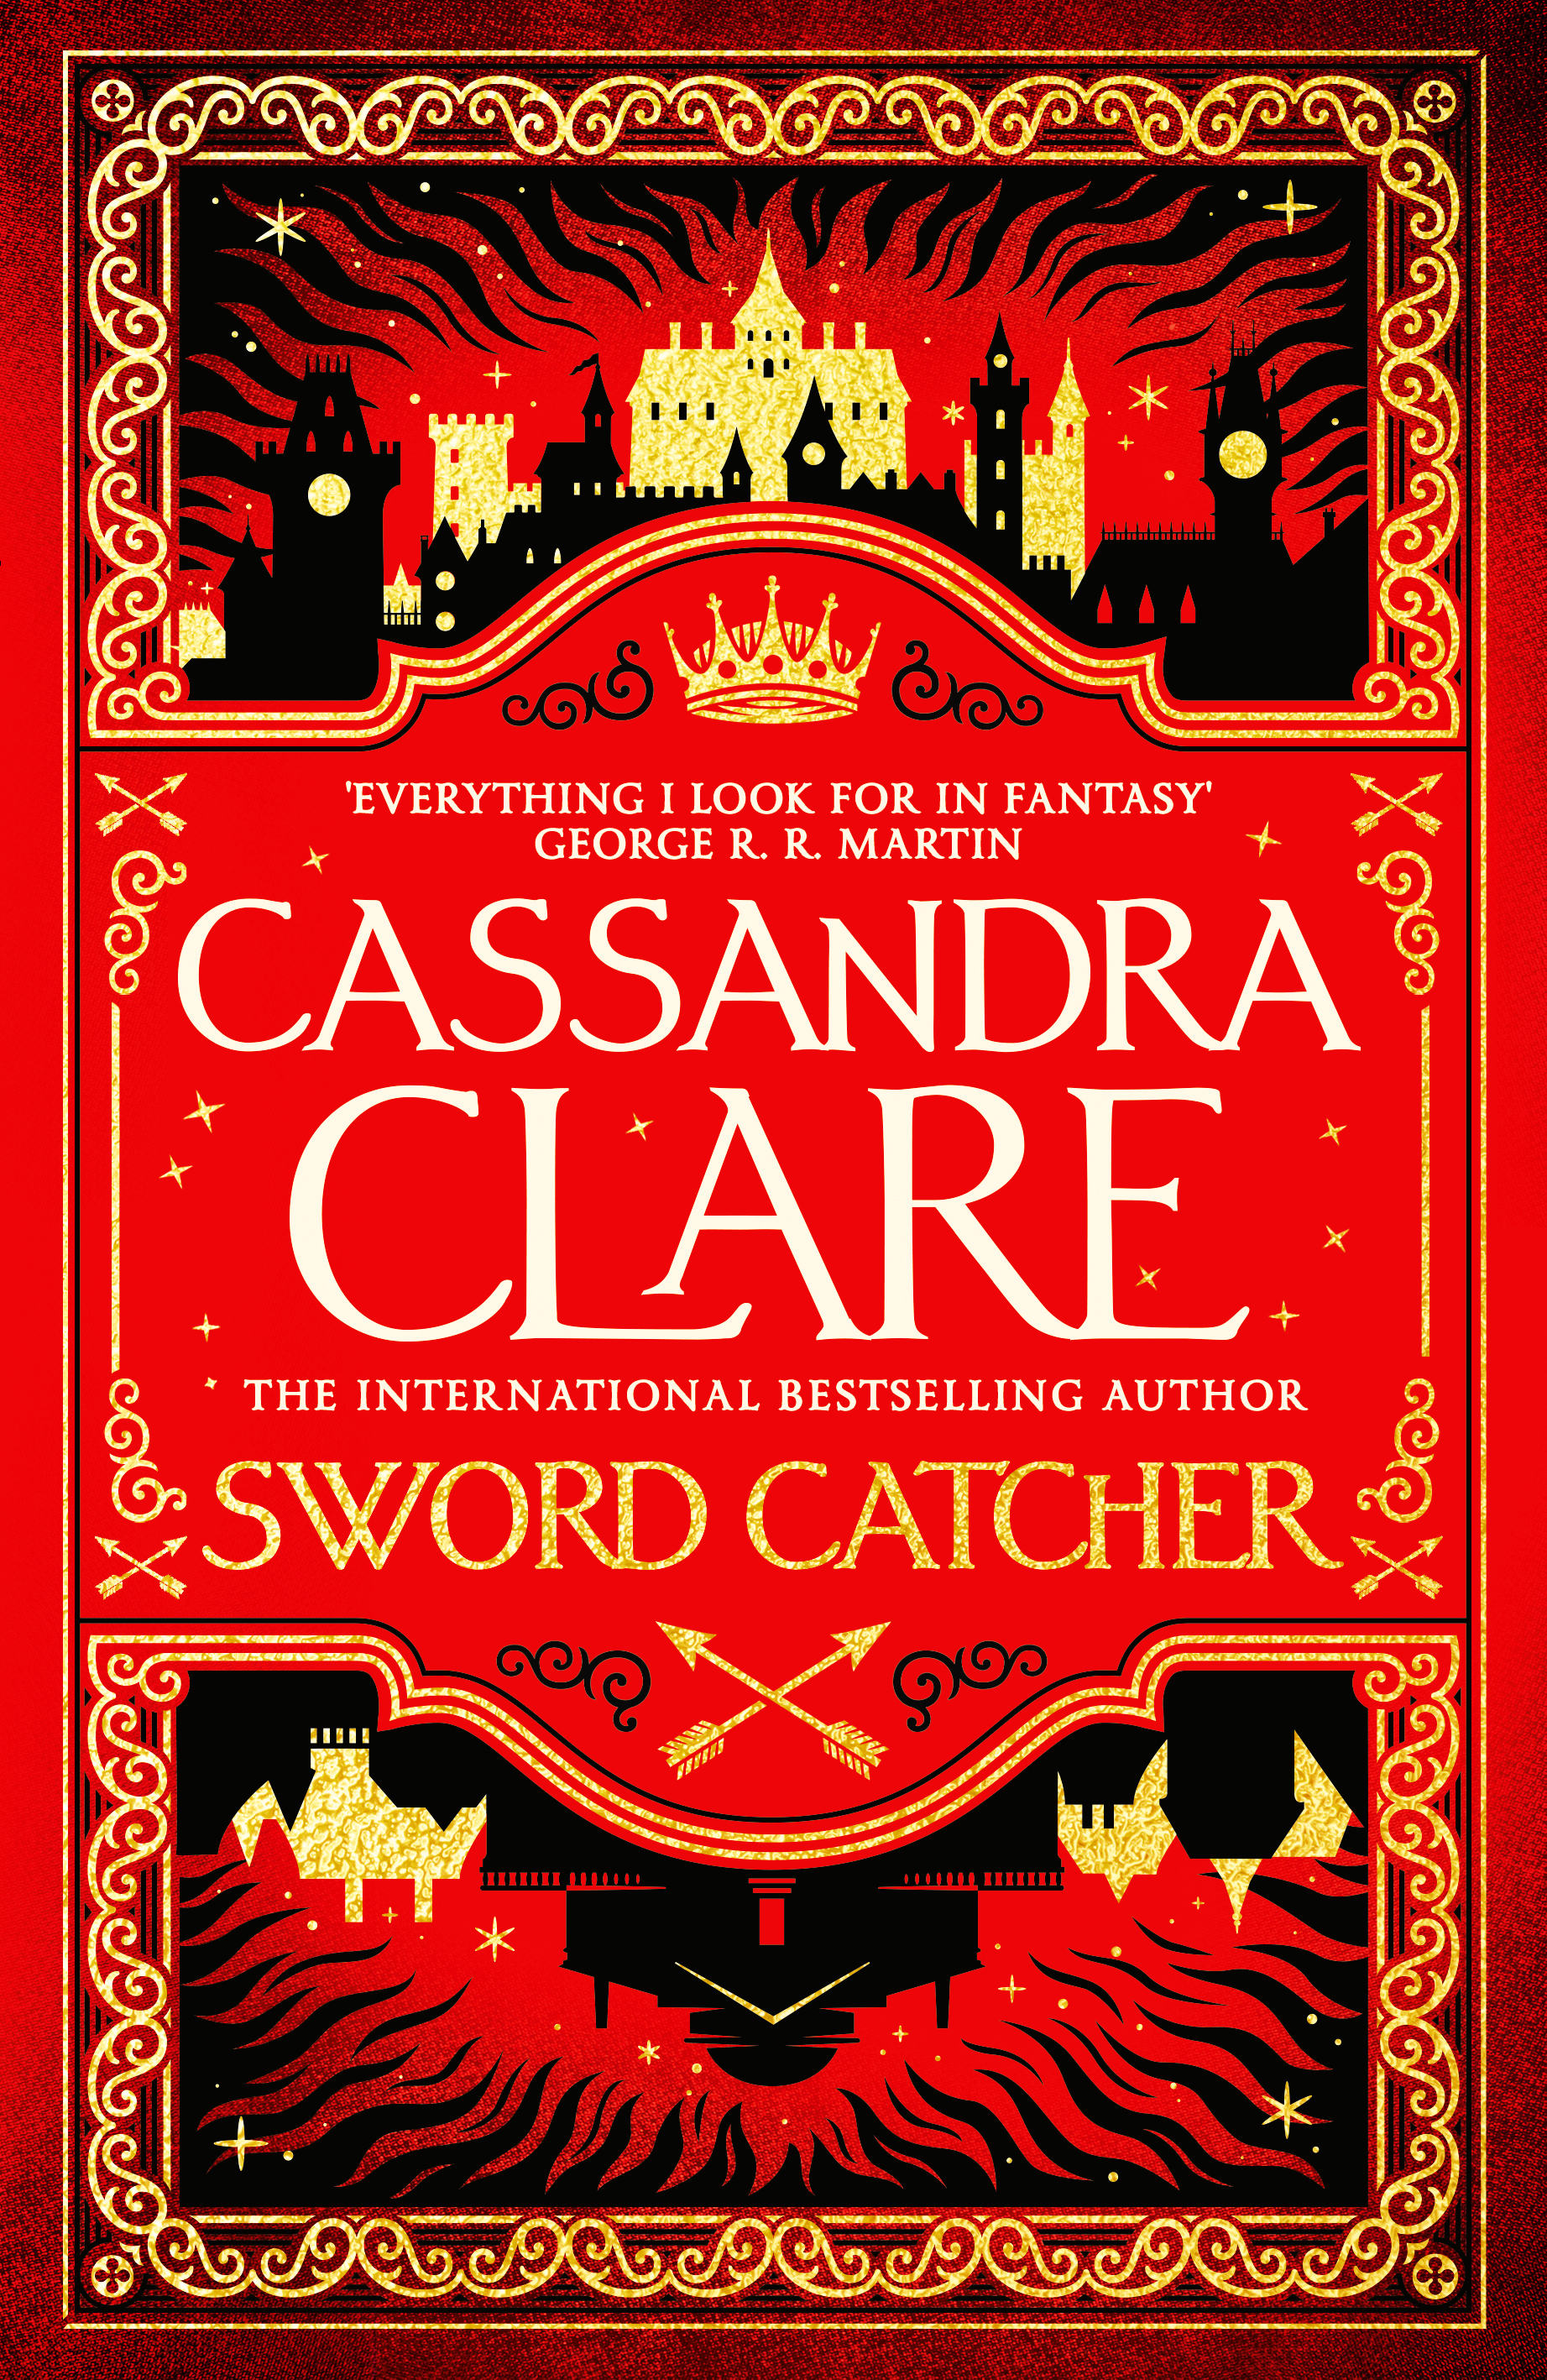 The Bookseller - Author Interviews - Cassandra Clare 'I want the  characters to drive the story not the magic